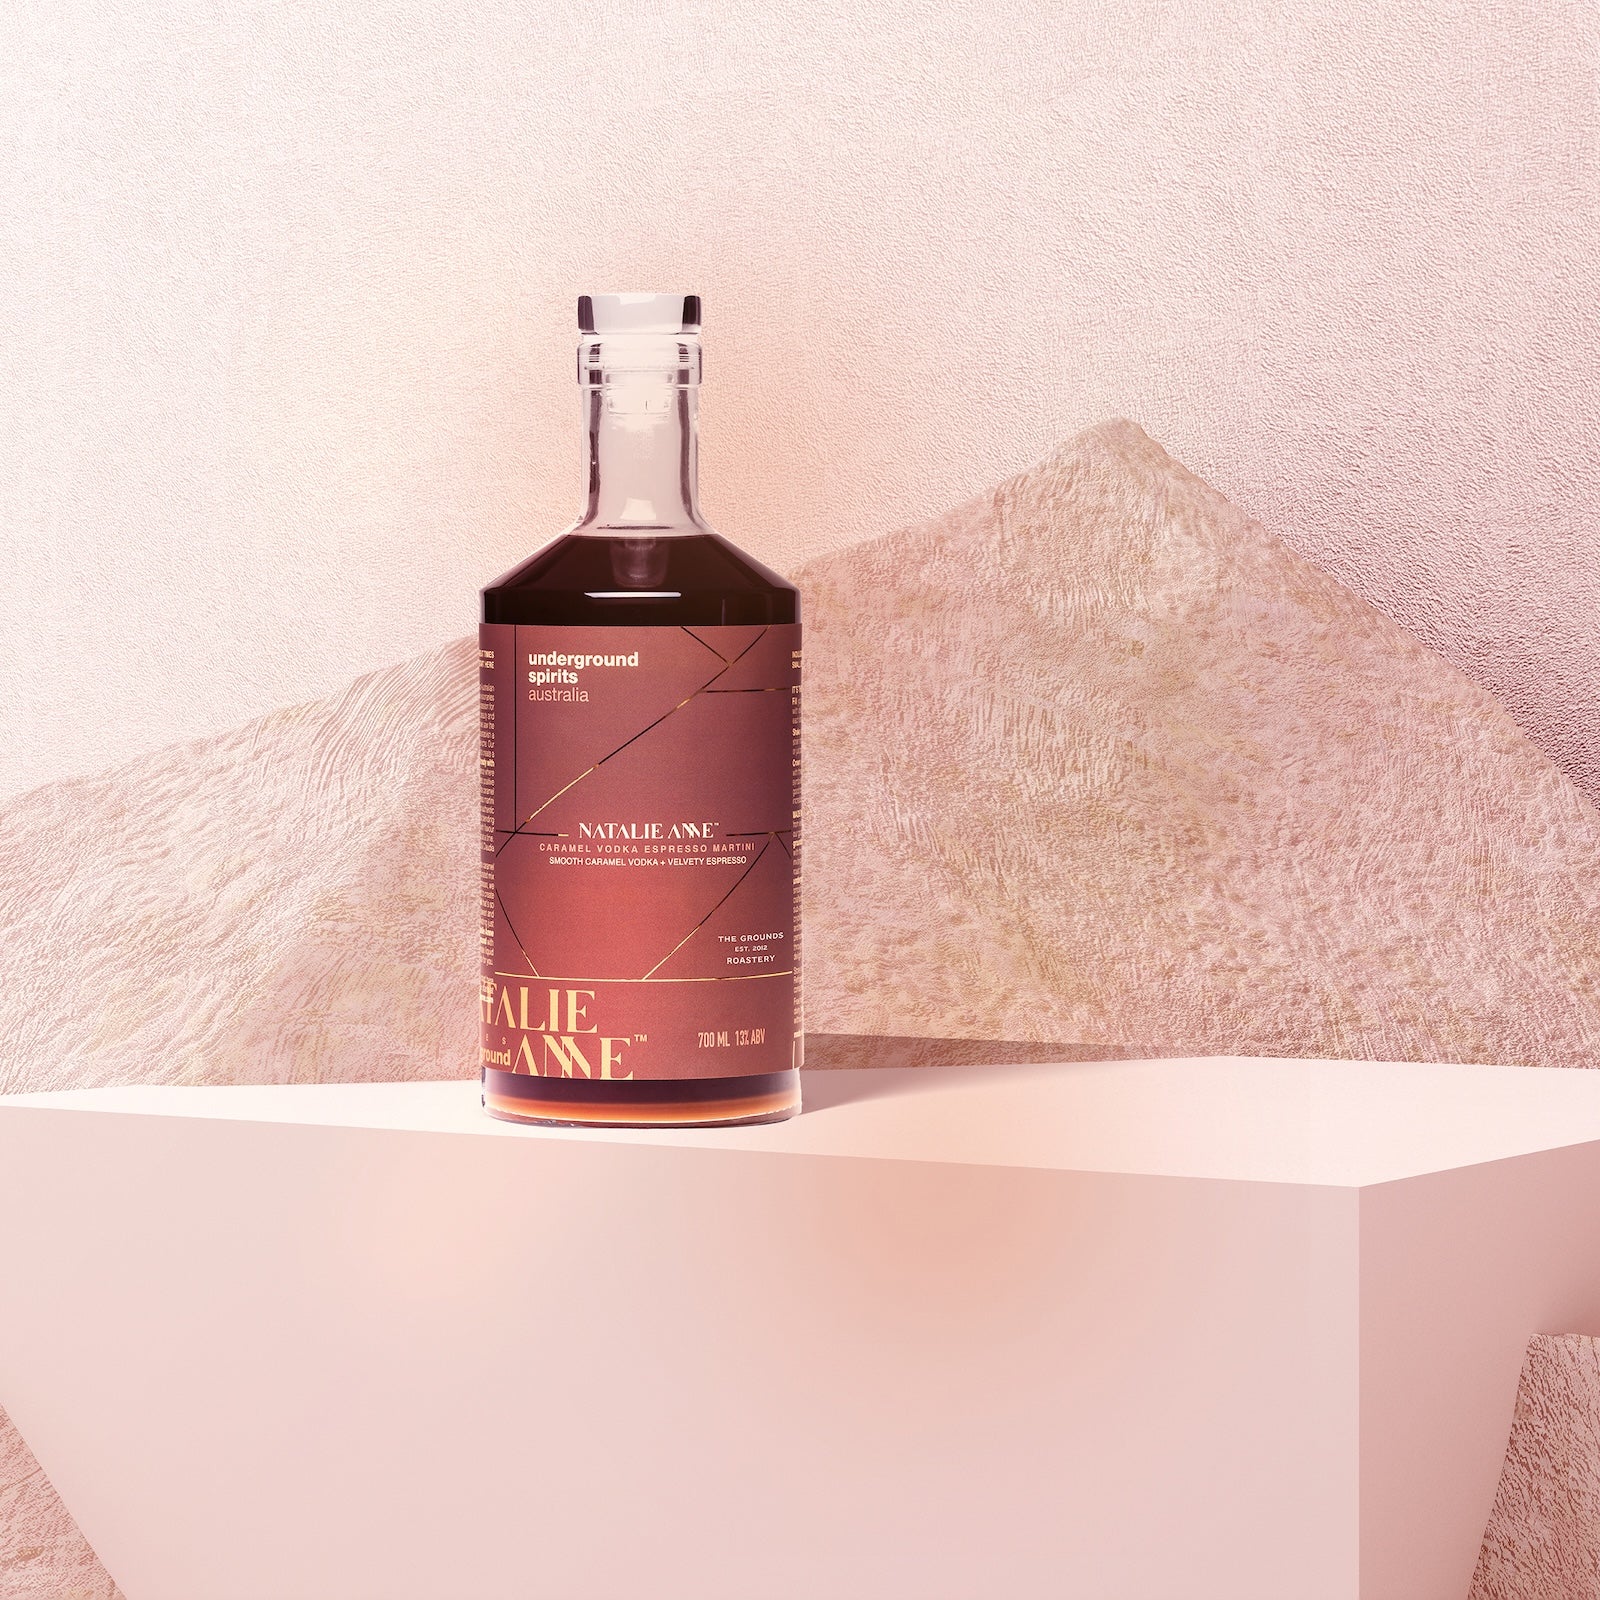 Underground Spirits Australia x Natalie Anne Limited Edition Caramel Espresso Martini sits elegantly on a minimalist pedestal, surrounded by abstract textures and warm lighting, embodying the premium craftsmanship and innovative flavours of Underground Spirits Canberra